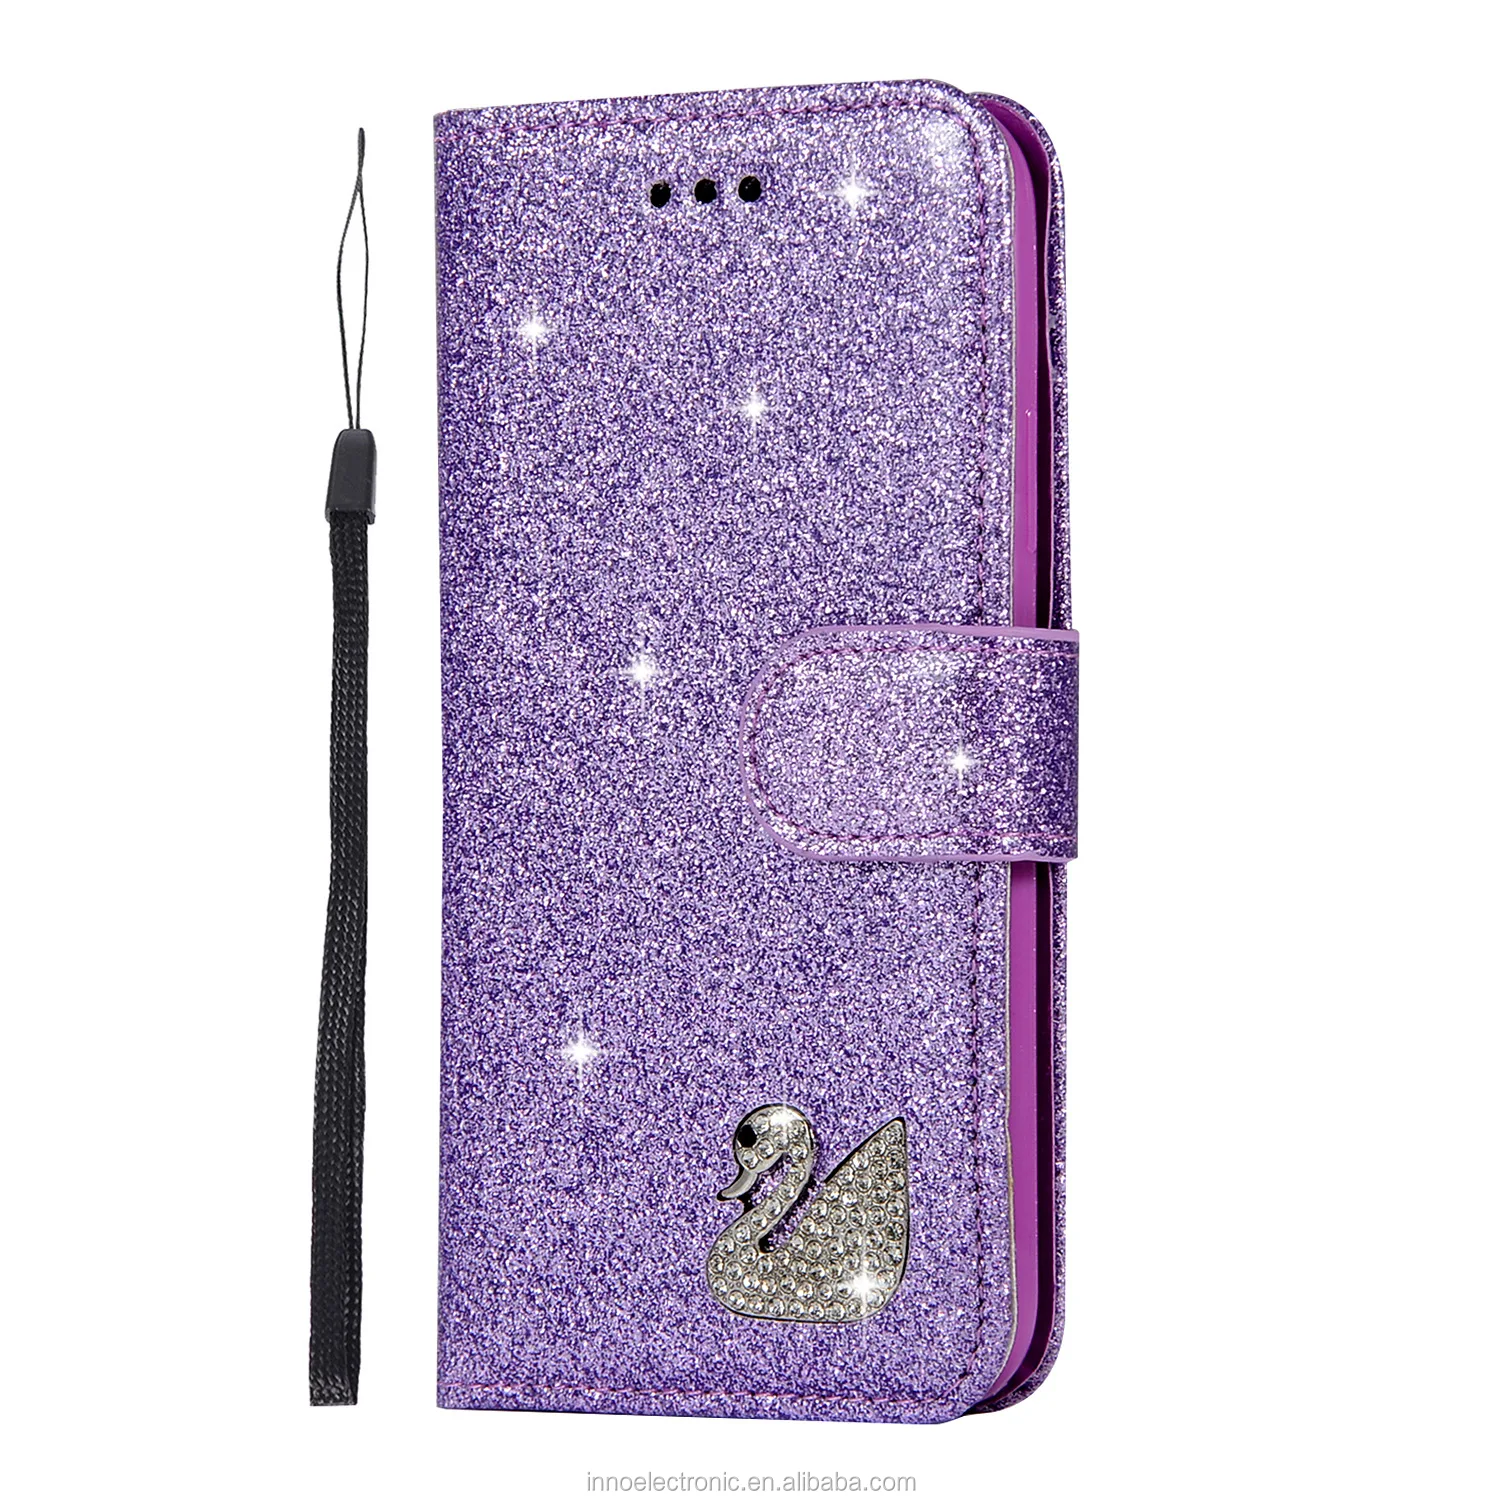 Cute Diamond Girly Wallet Leather Glitter Flip Phone Case Cover With Card Holder For Iphone 6s 7 8 Plus X Xr Xs Max Samsung Buy For Iphone Diamond Case For Iphone